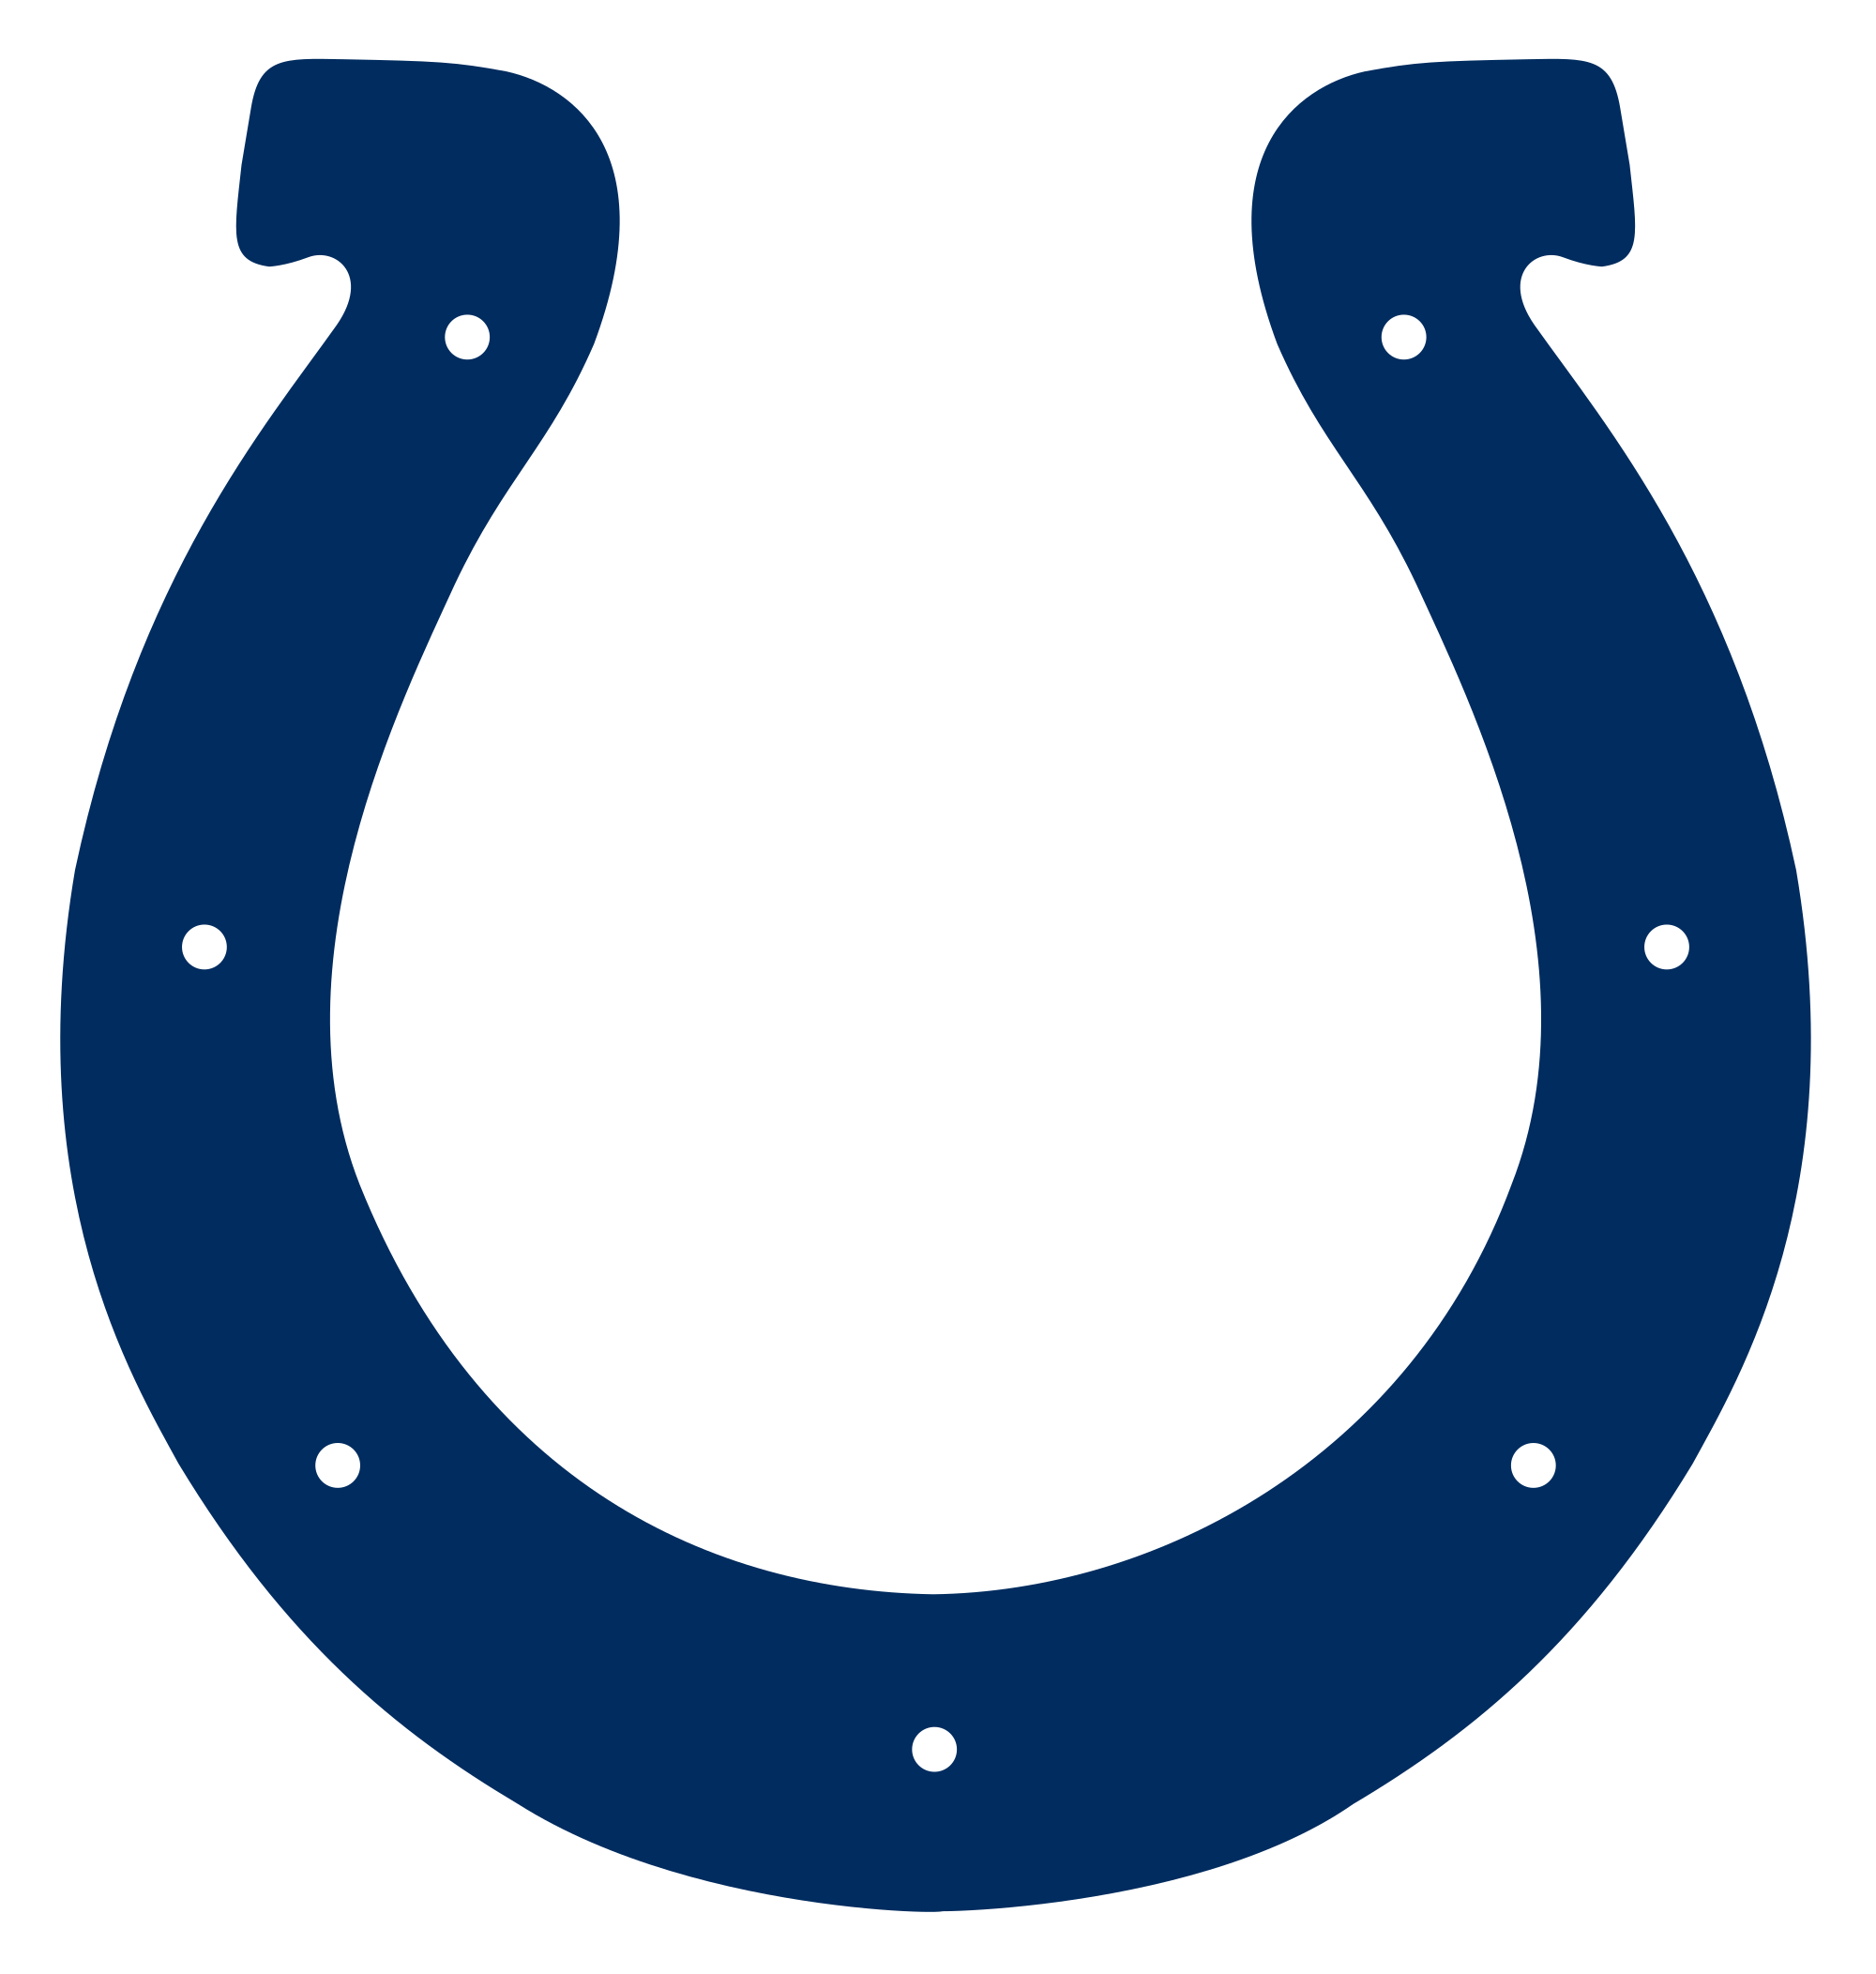 Indianapolis Colts Horse Logo - File:Indianapolis Colts logo.svg - Wikimedia Commons